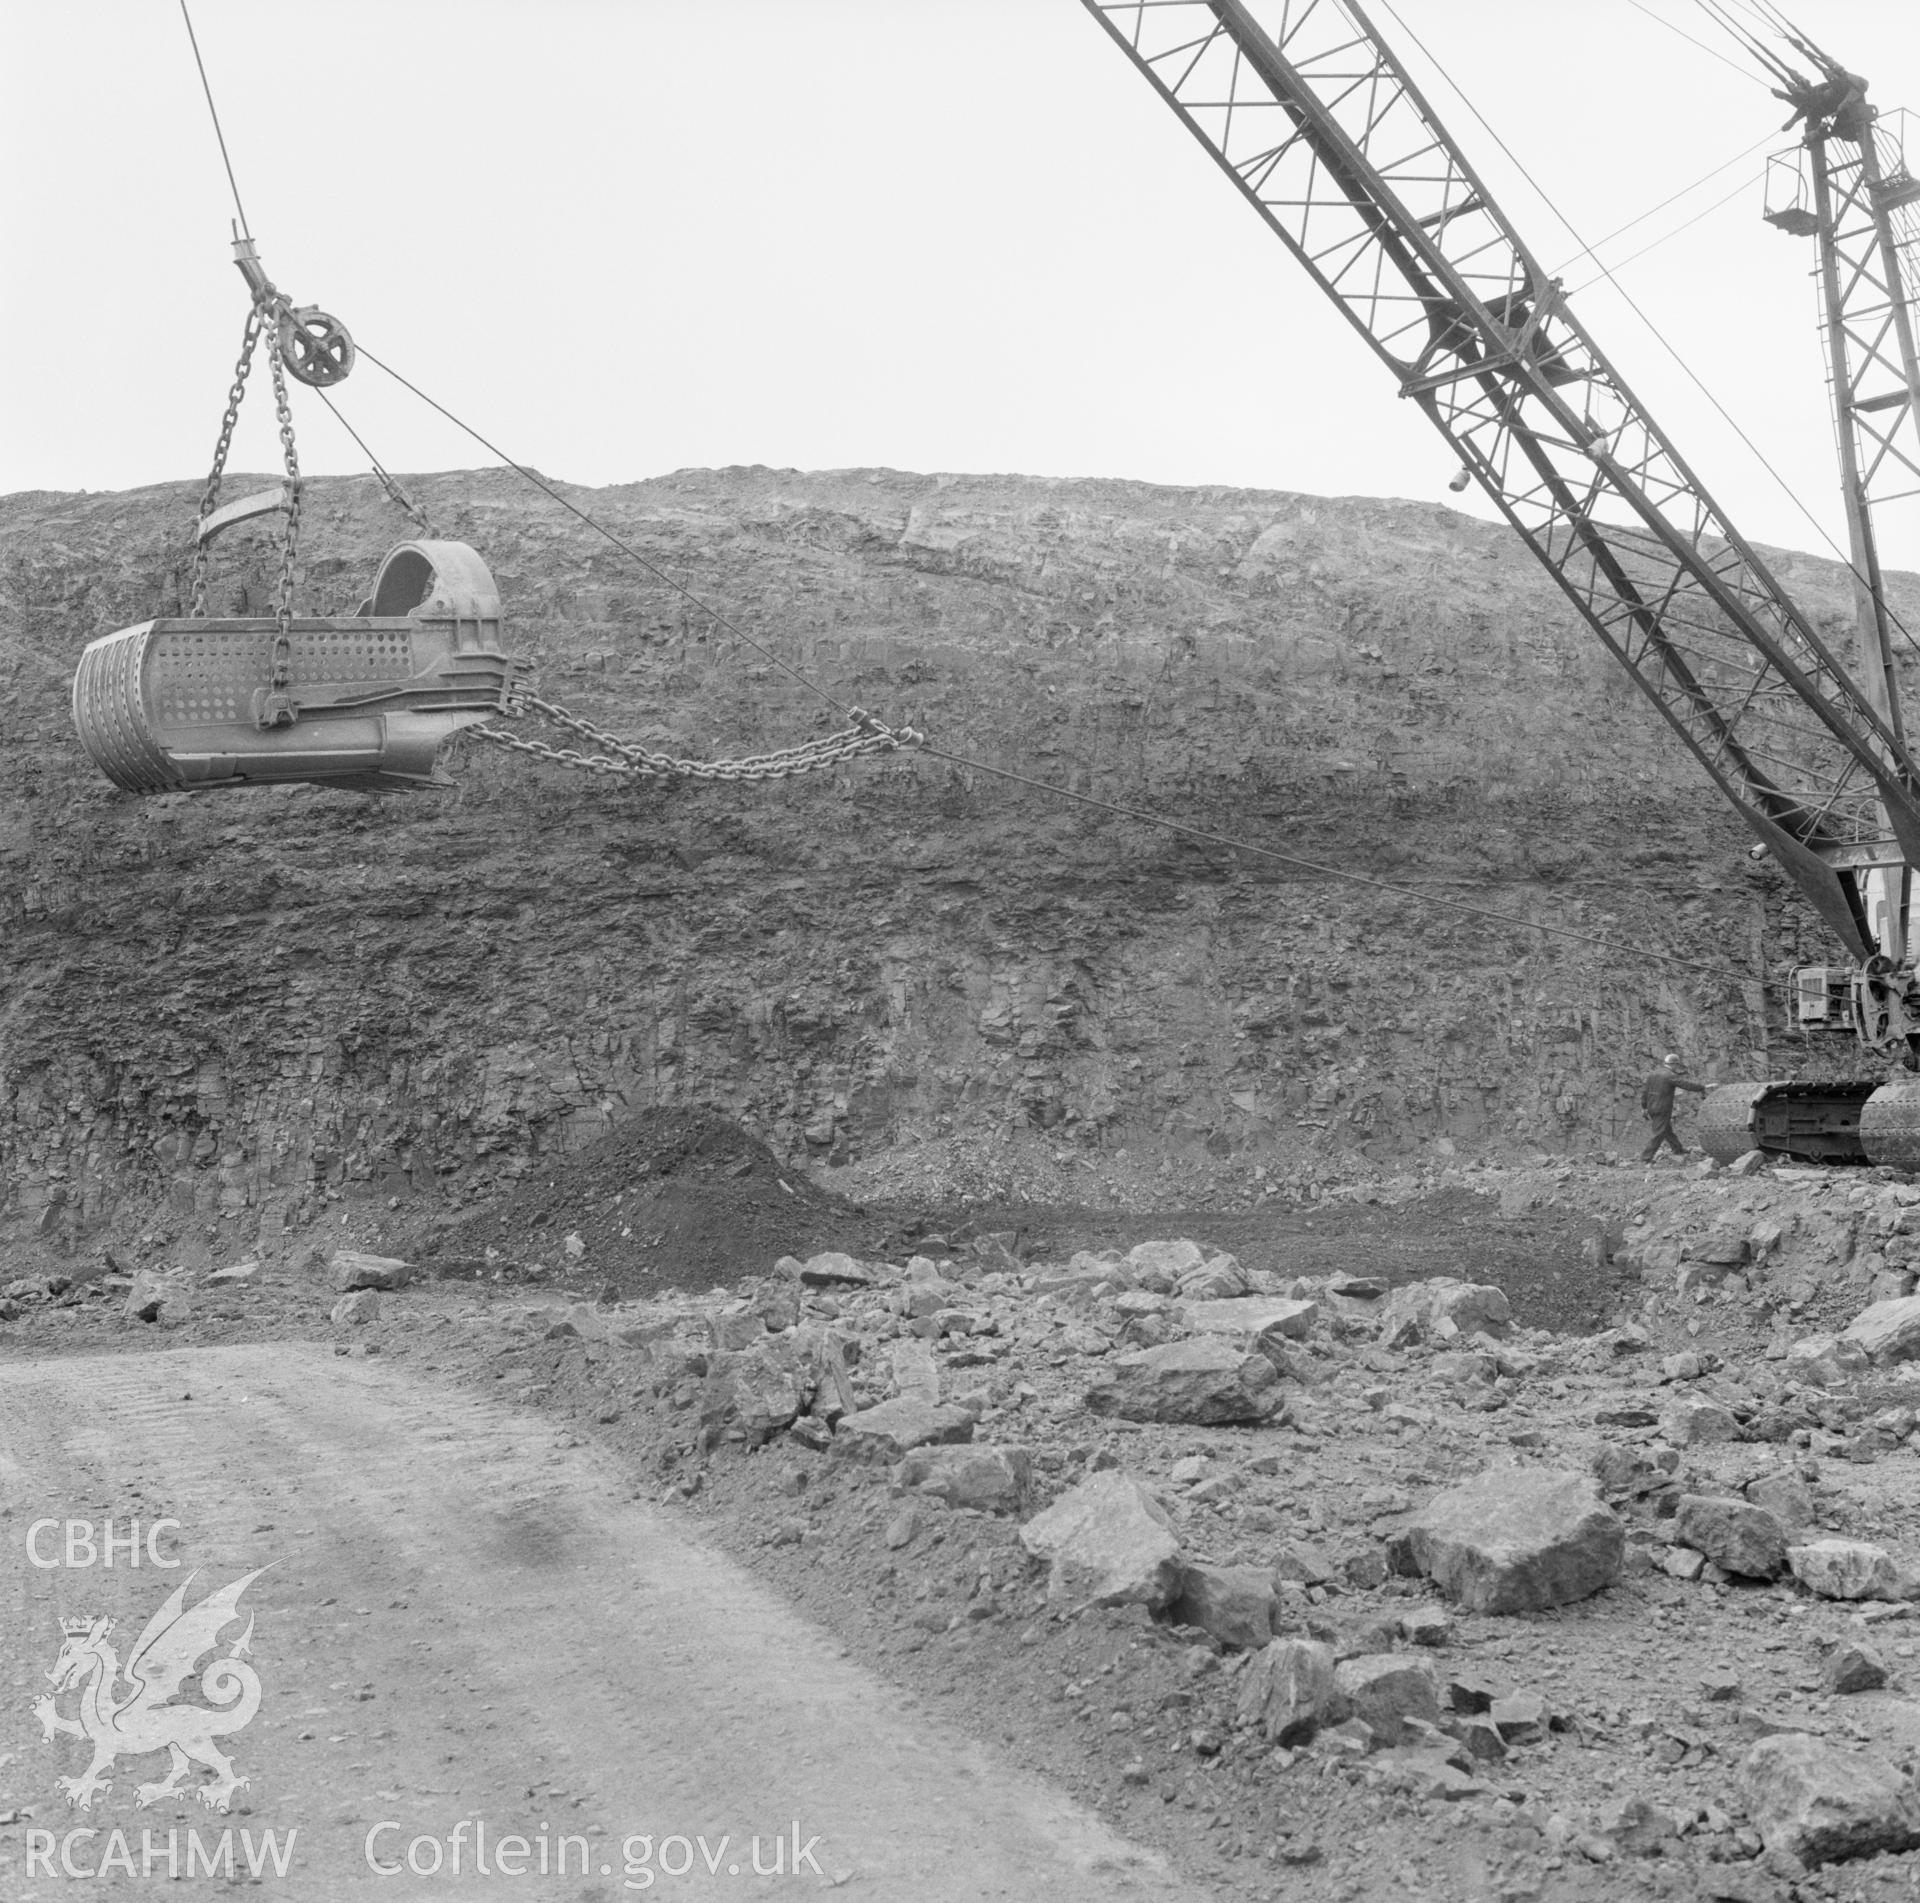 Digital copy of a black and white negative showing working crane at Dowlais Top Opencast Mine, taken by Douglas Hague, undated.